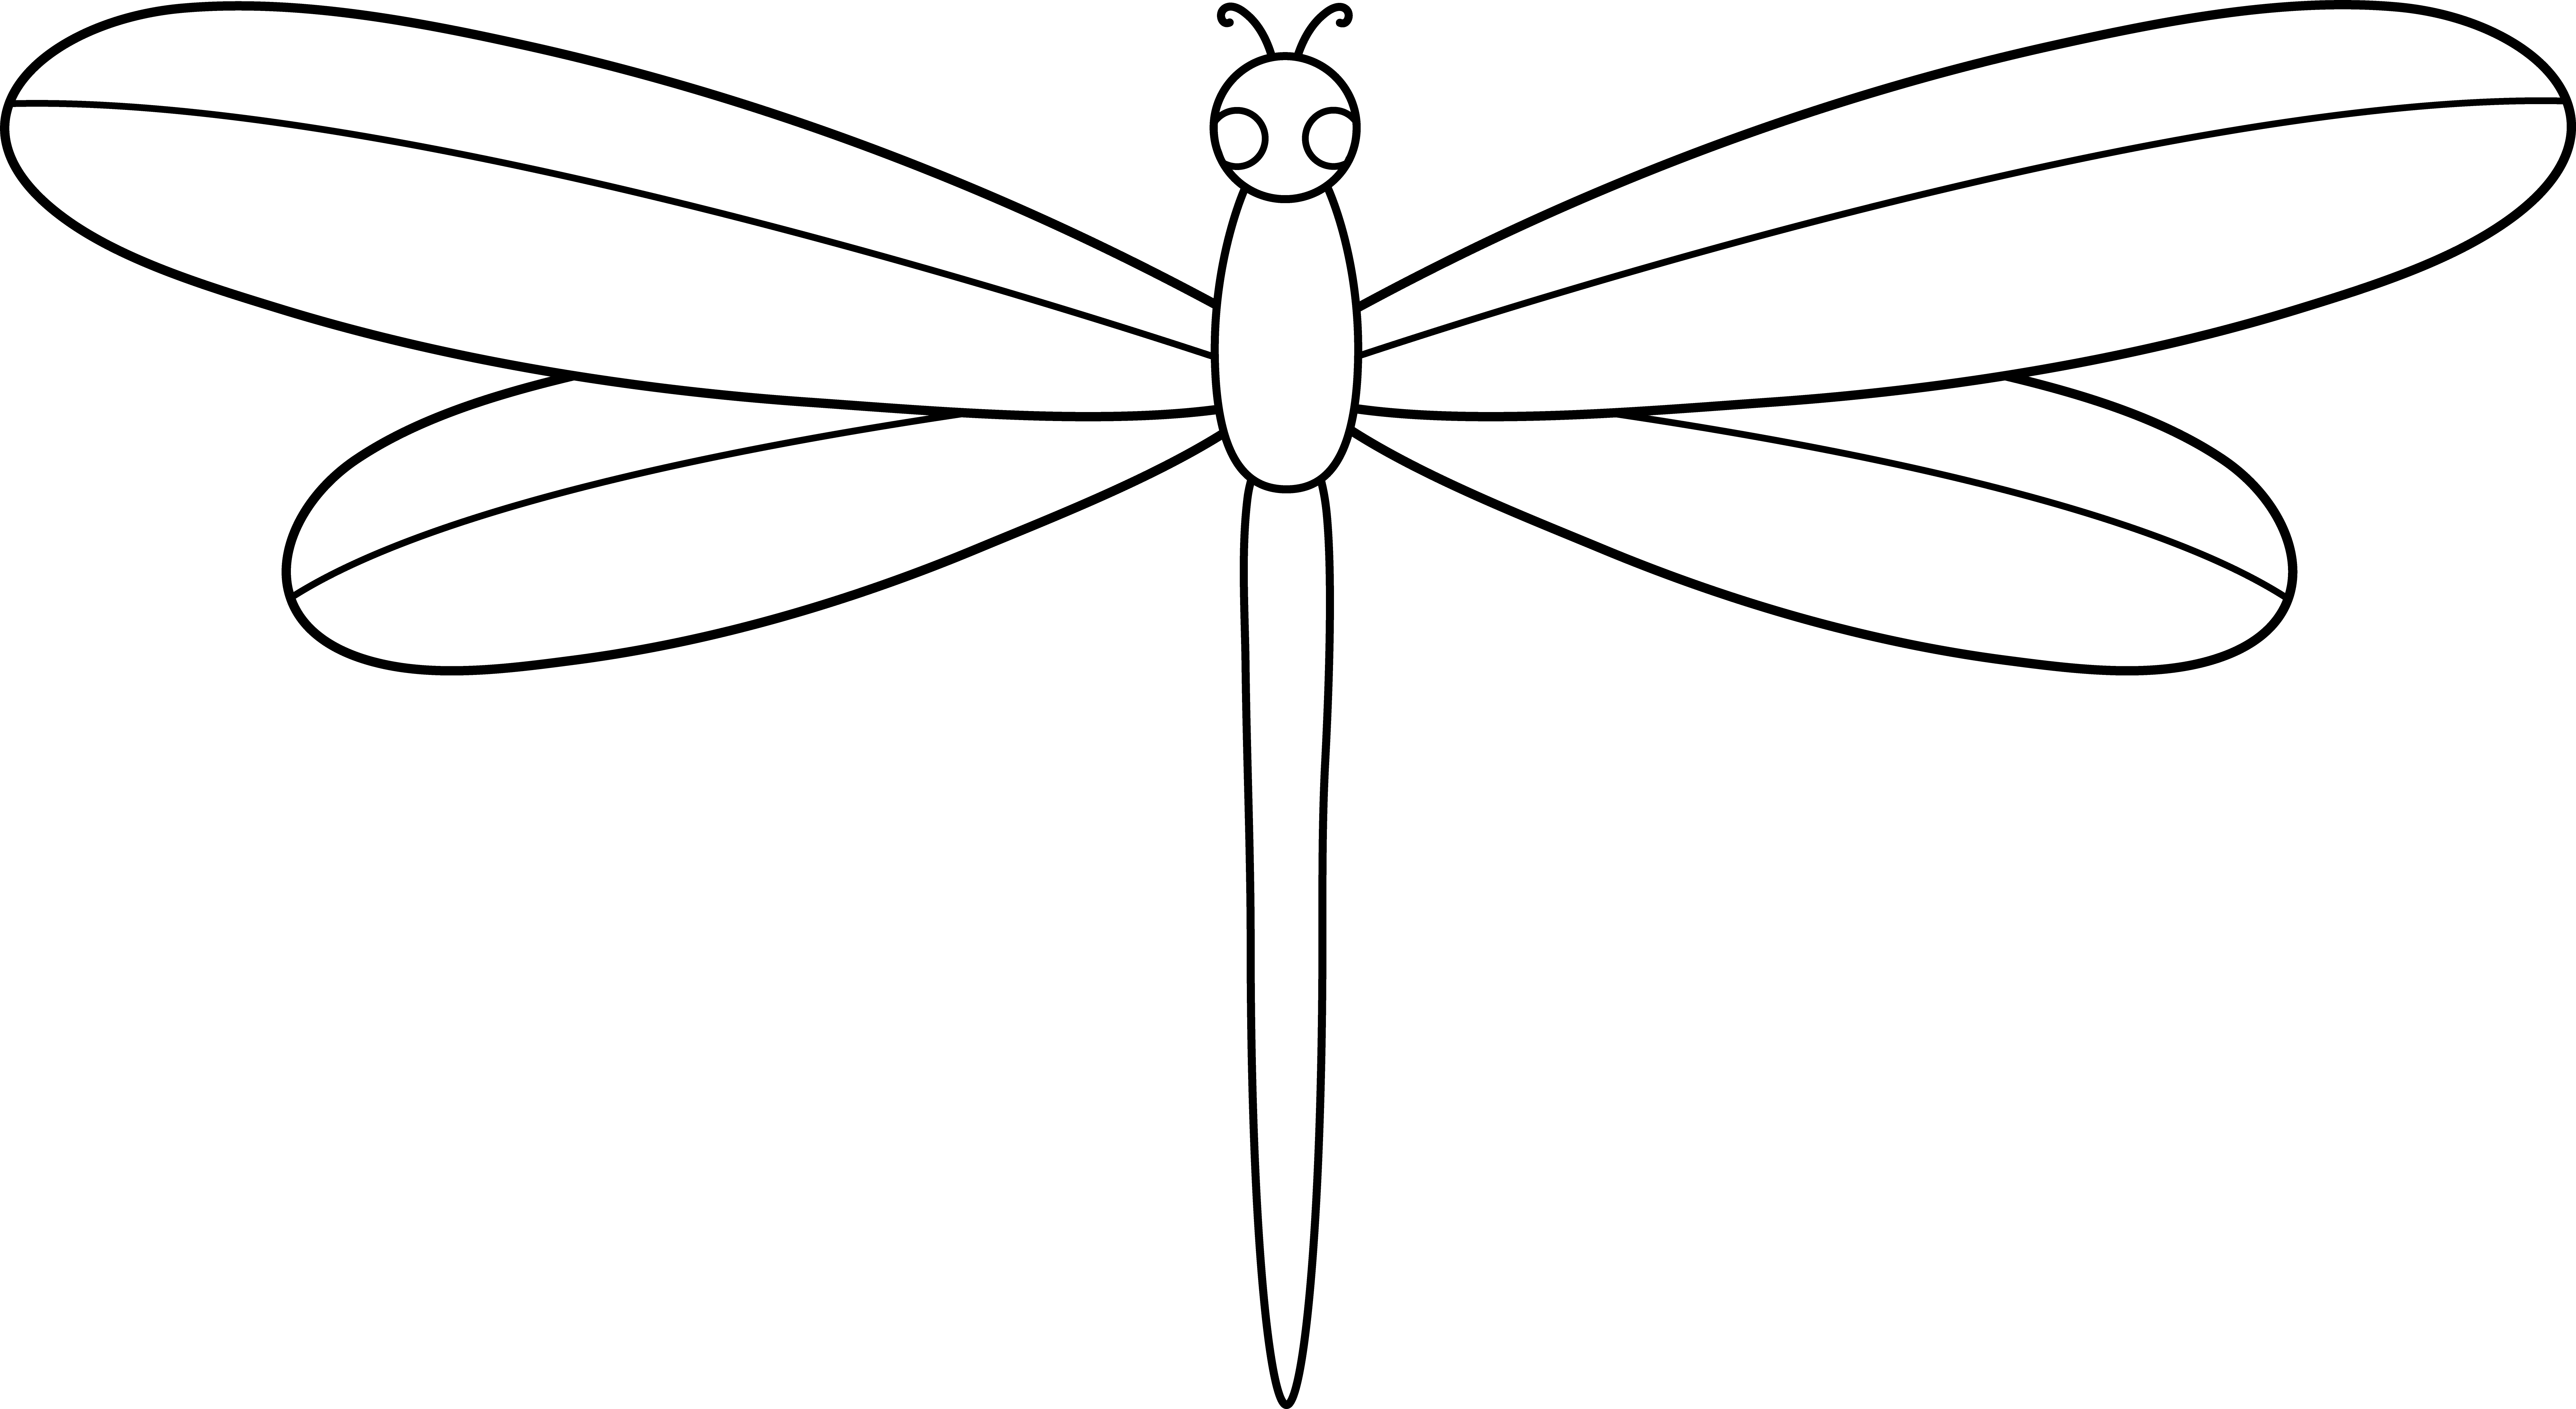 Clip Arts Related To : colouring picture of dragonfly. view all Dragonfly O...